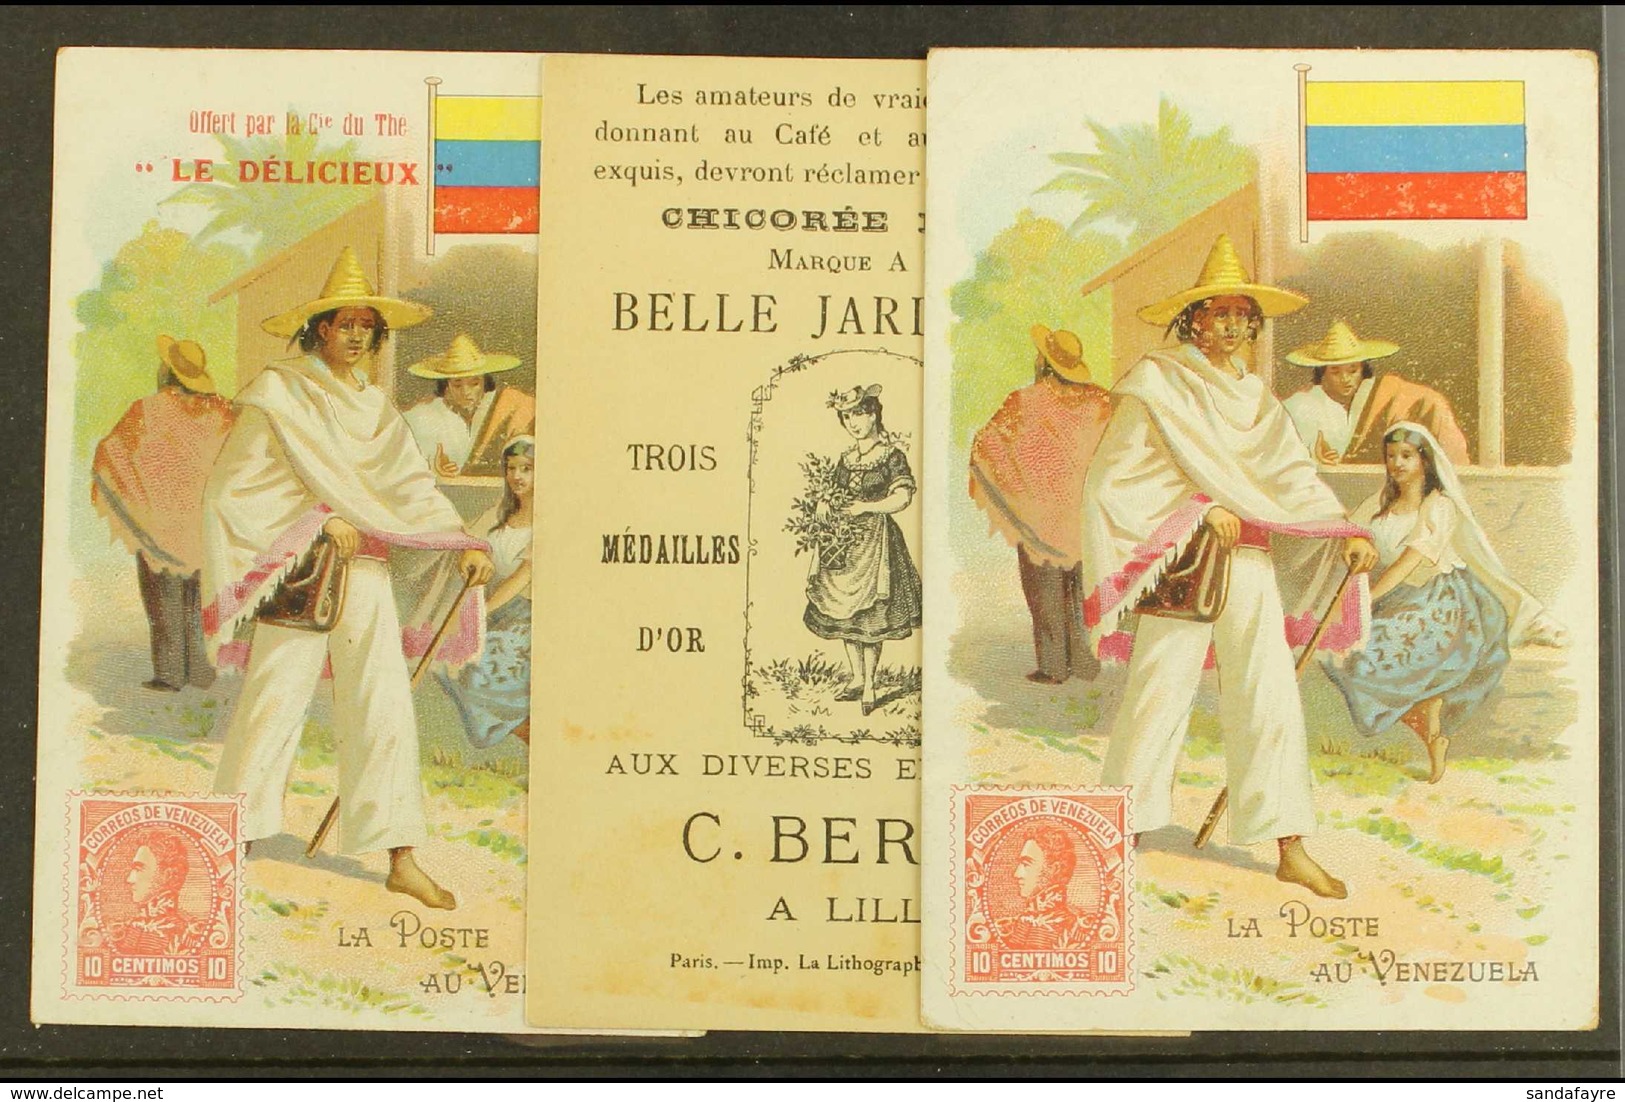 1908 Stamp Designs On Advertising Cards, All Different, Seldom Seen (3 Cards) For More Images, Please Visit Http://www.s - Venezuela